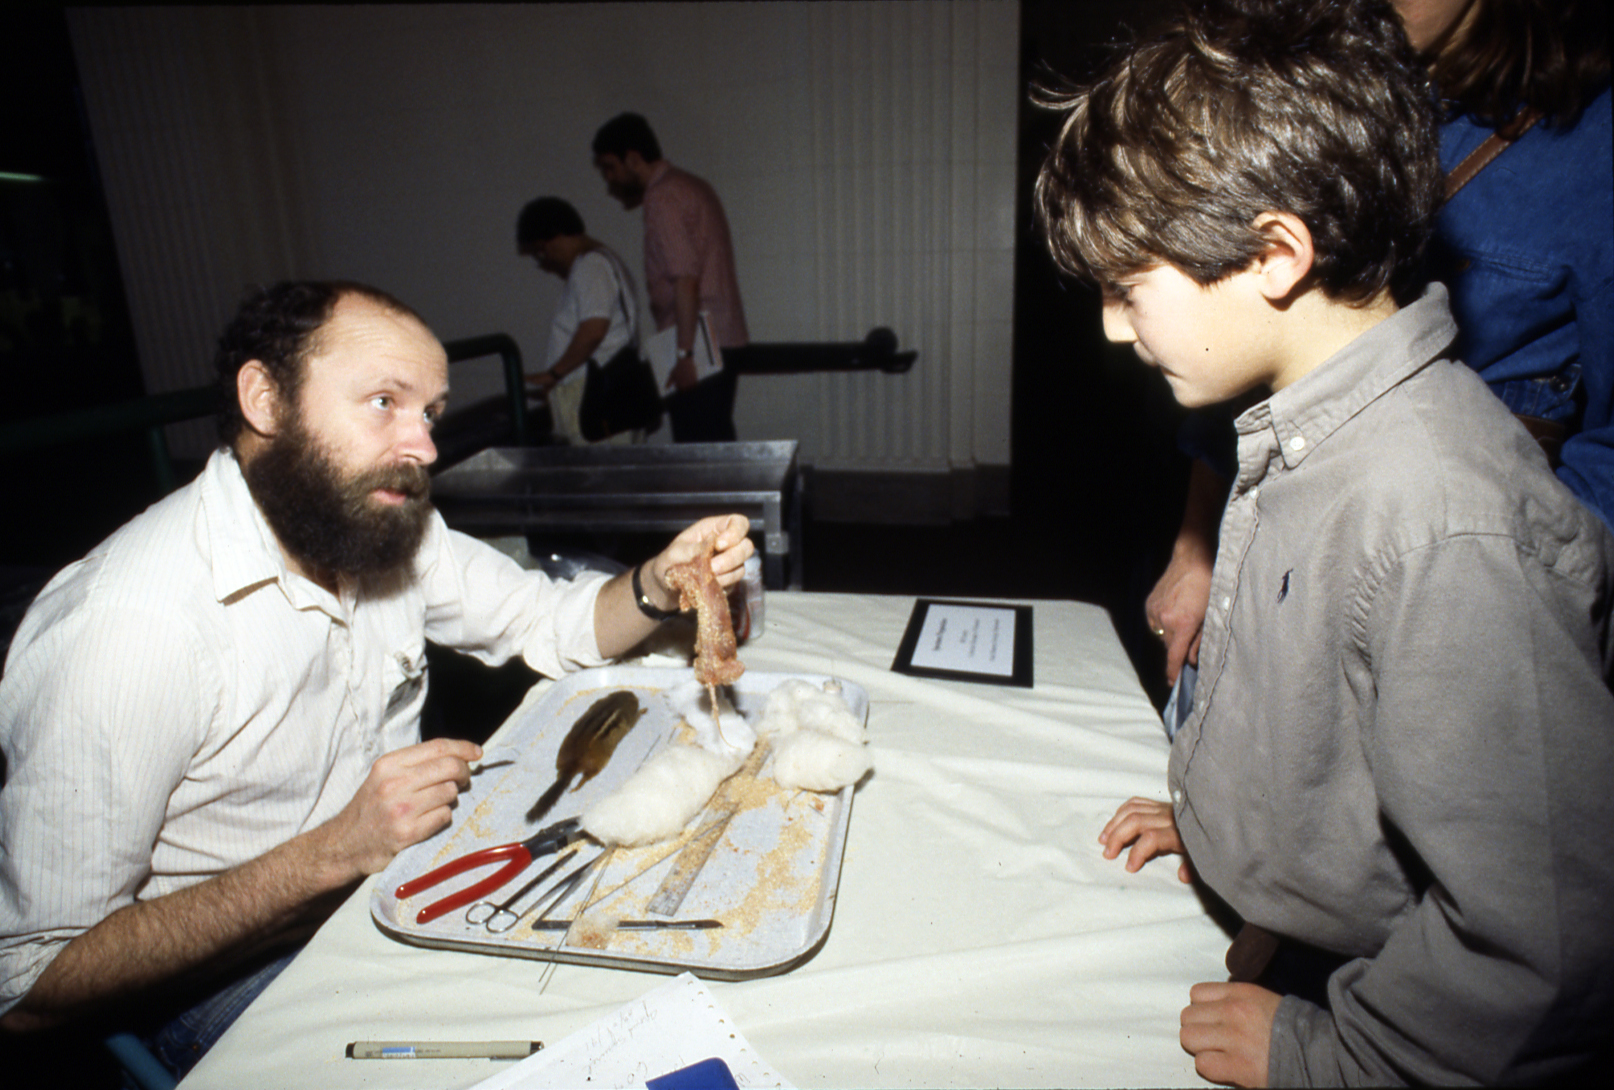 Bill gives visitors an up-close look at mammal preparation as part of a public program called “Nature Works” in 1991. Field Museum photo by James Balodimas. GN85769_7c